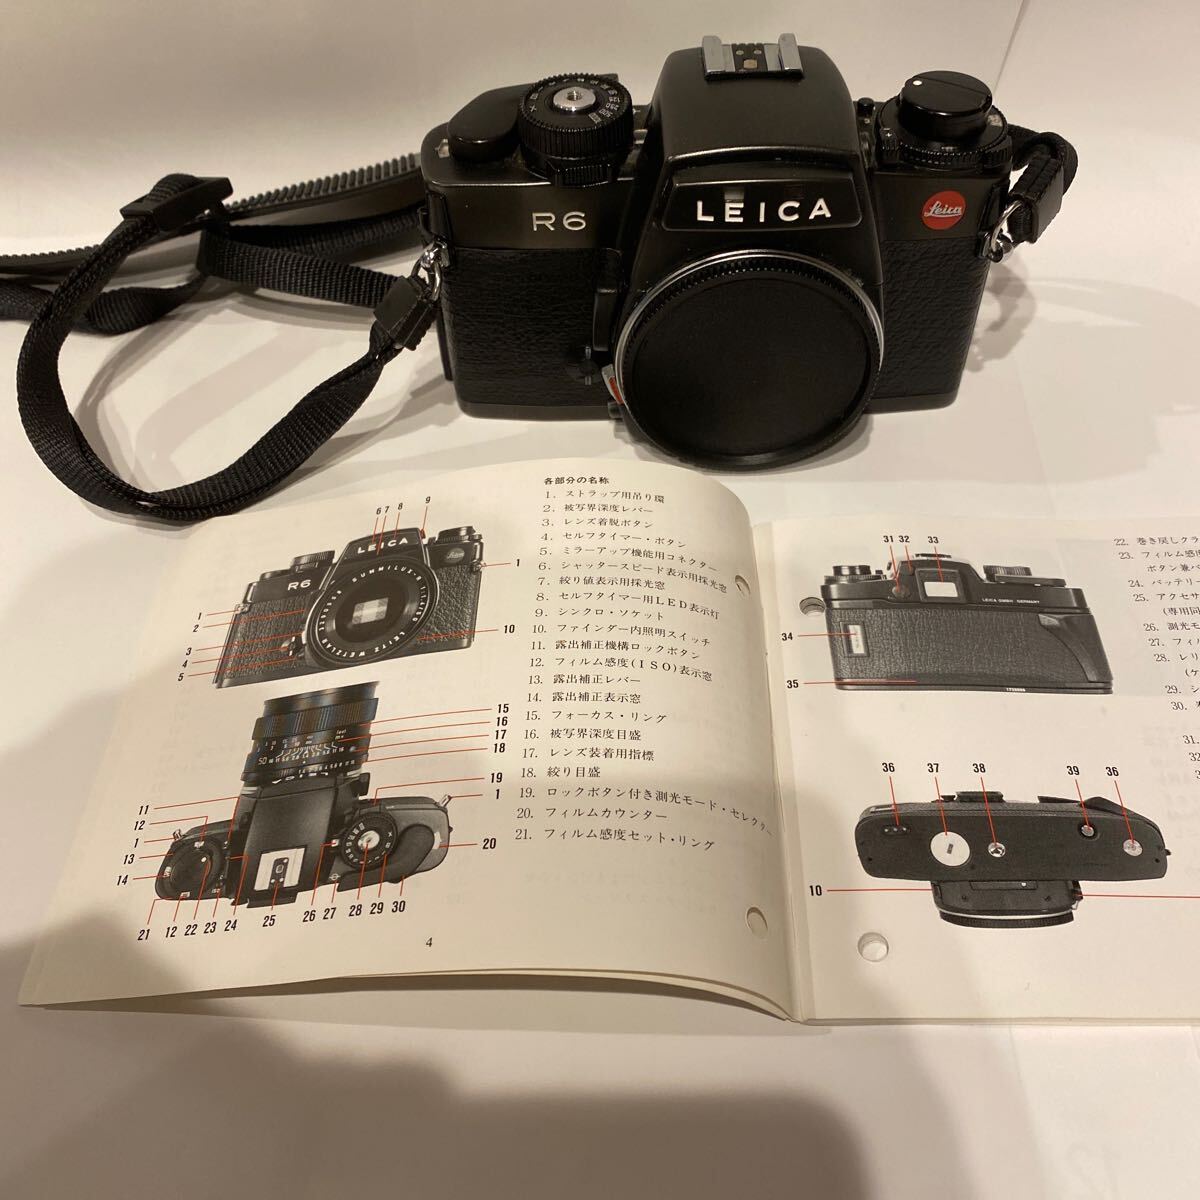  Leica R6 body use instructions attaching 